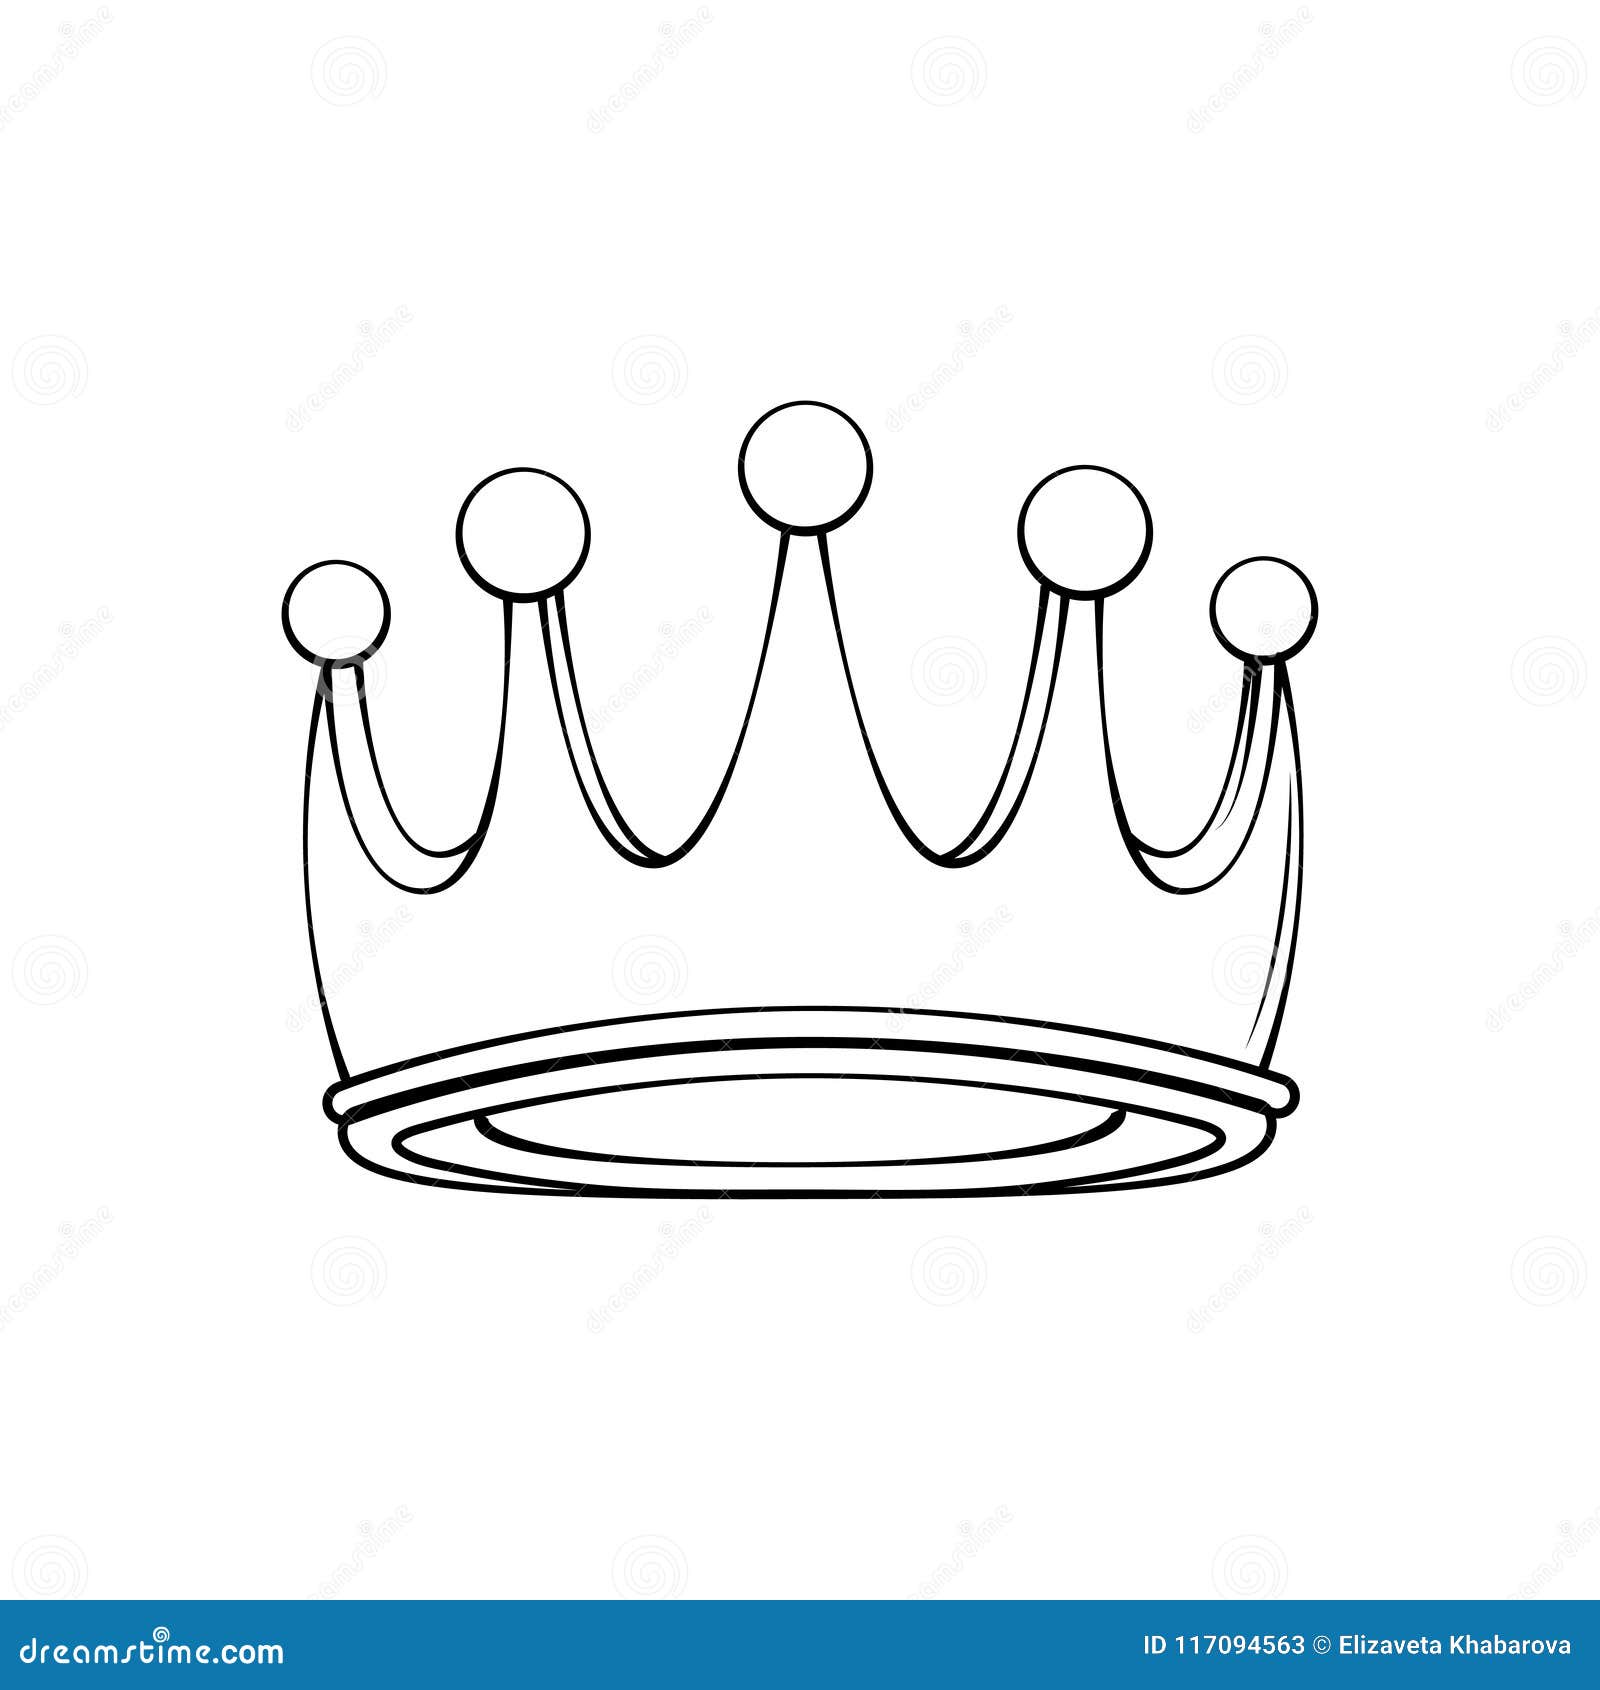 Crown of the King or Royal Crown Line Art Icon for Apps and Websites ...